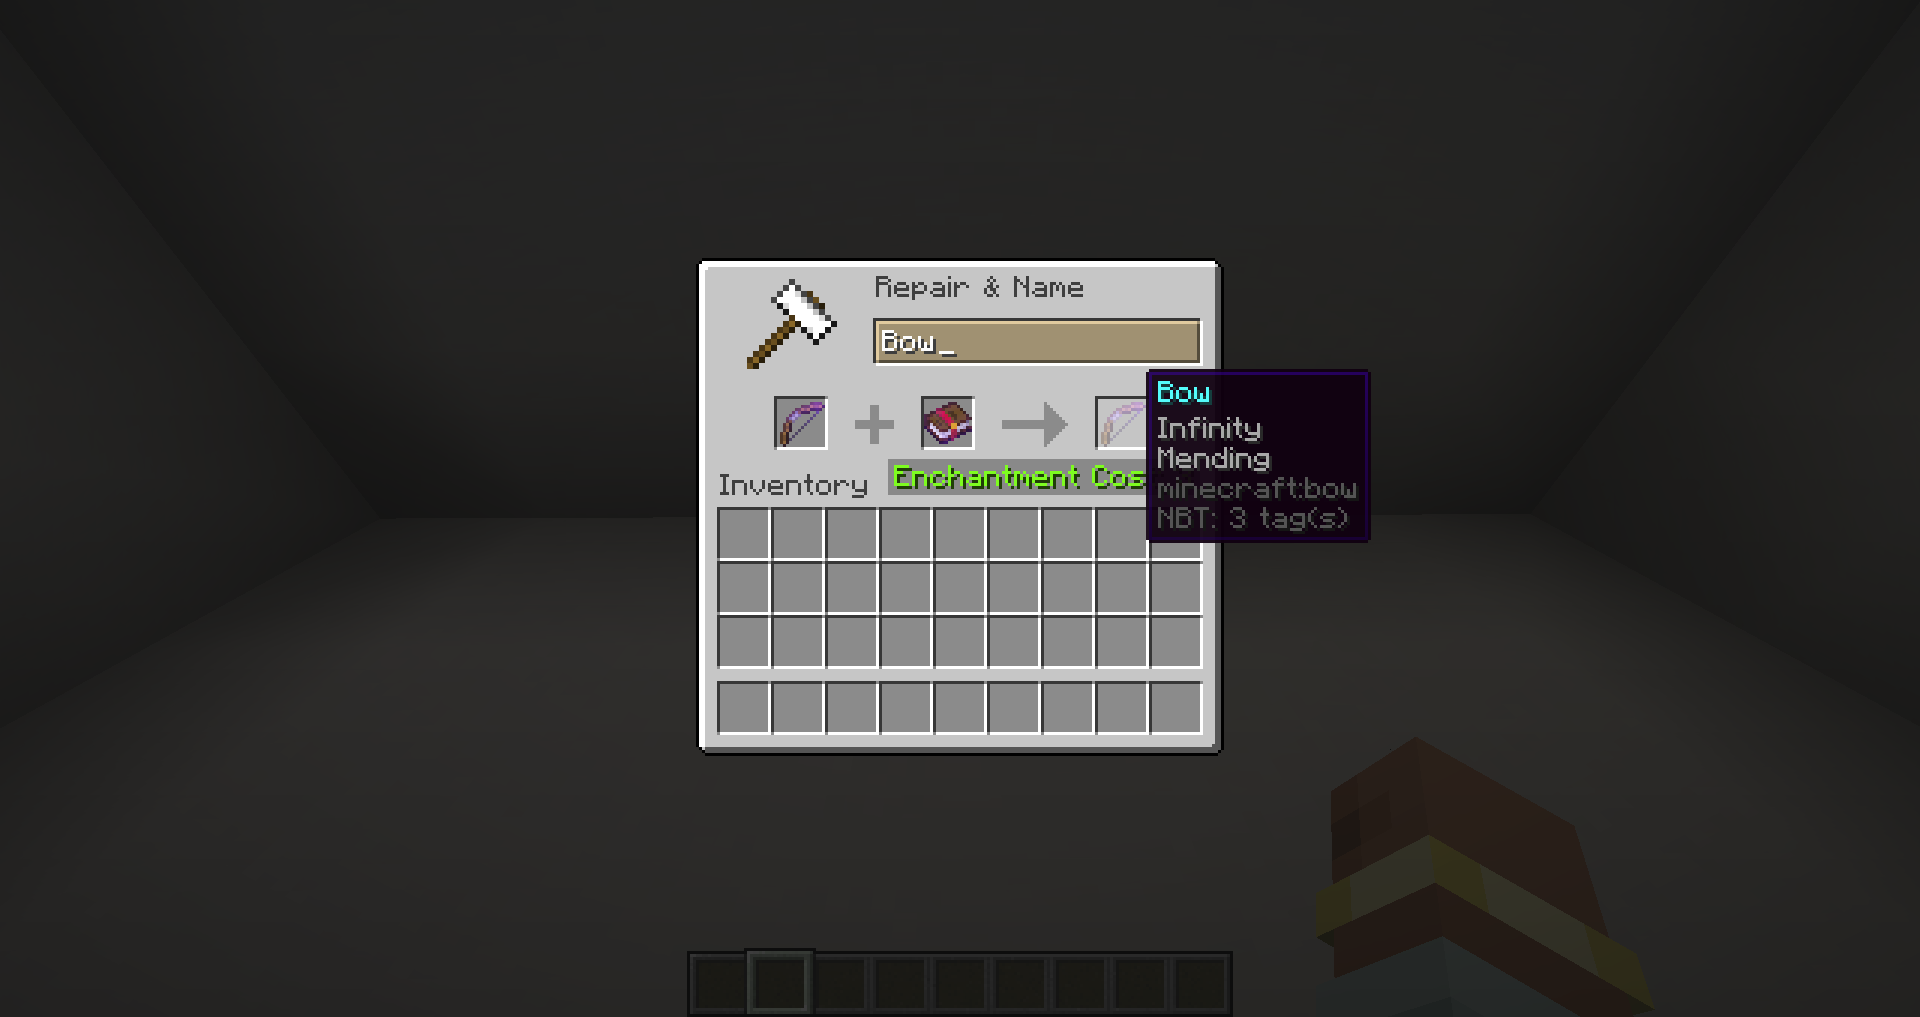 Minecraft: How To Get Mending Enchantment